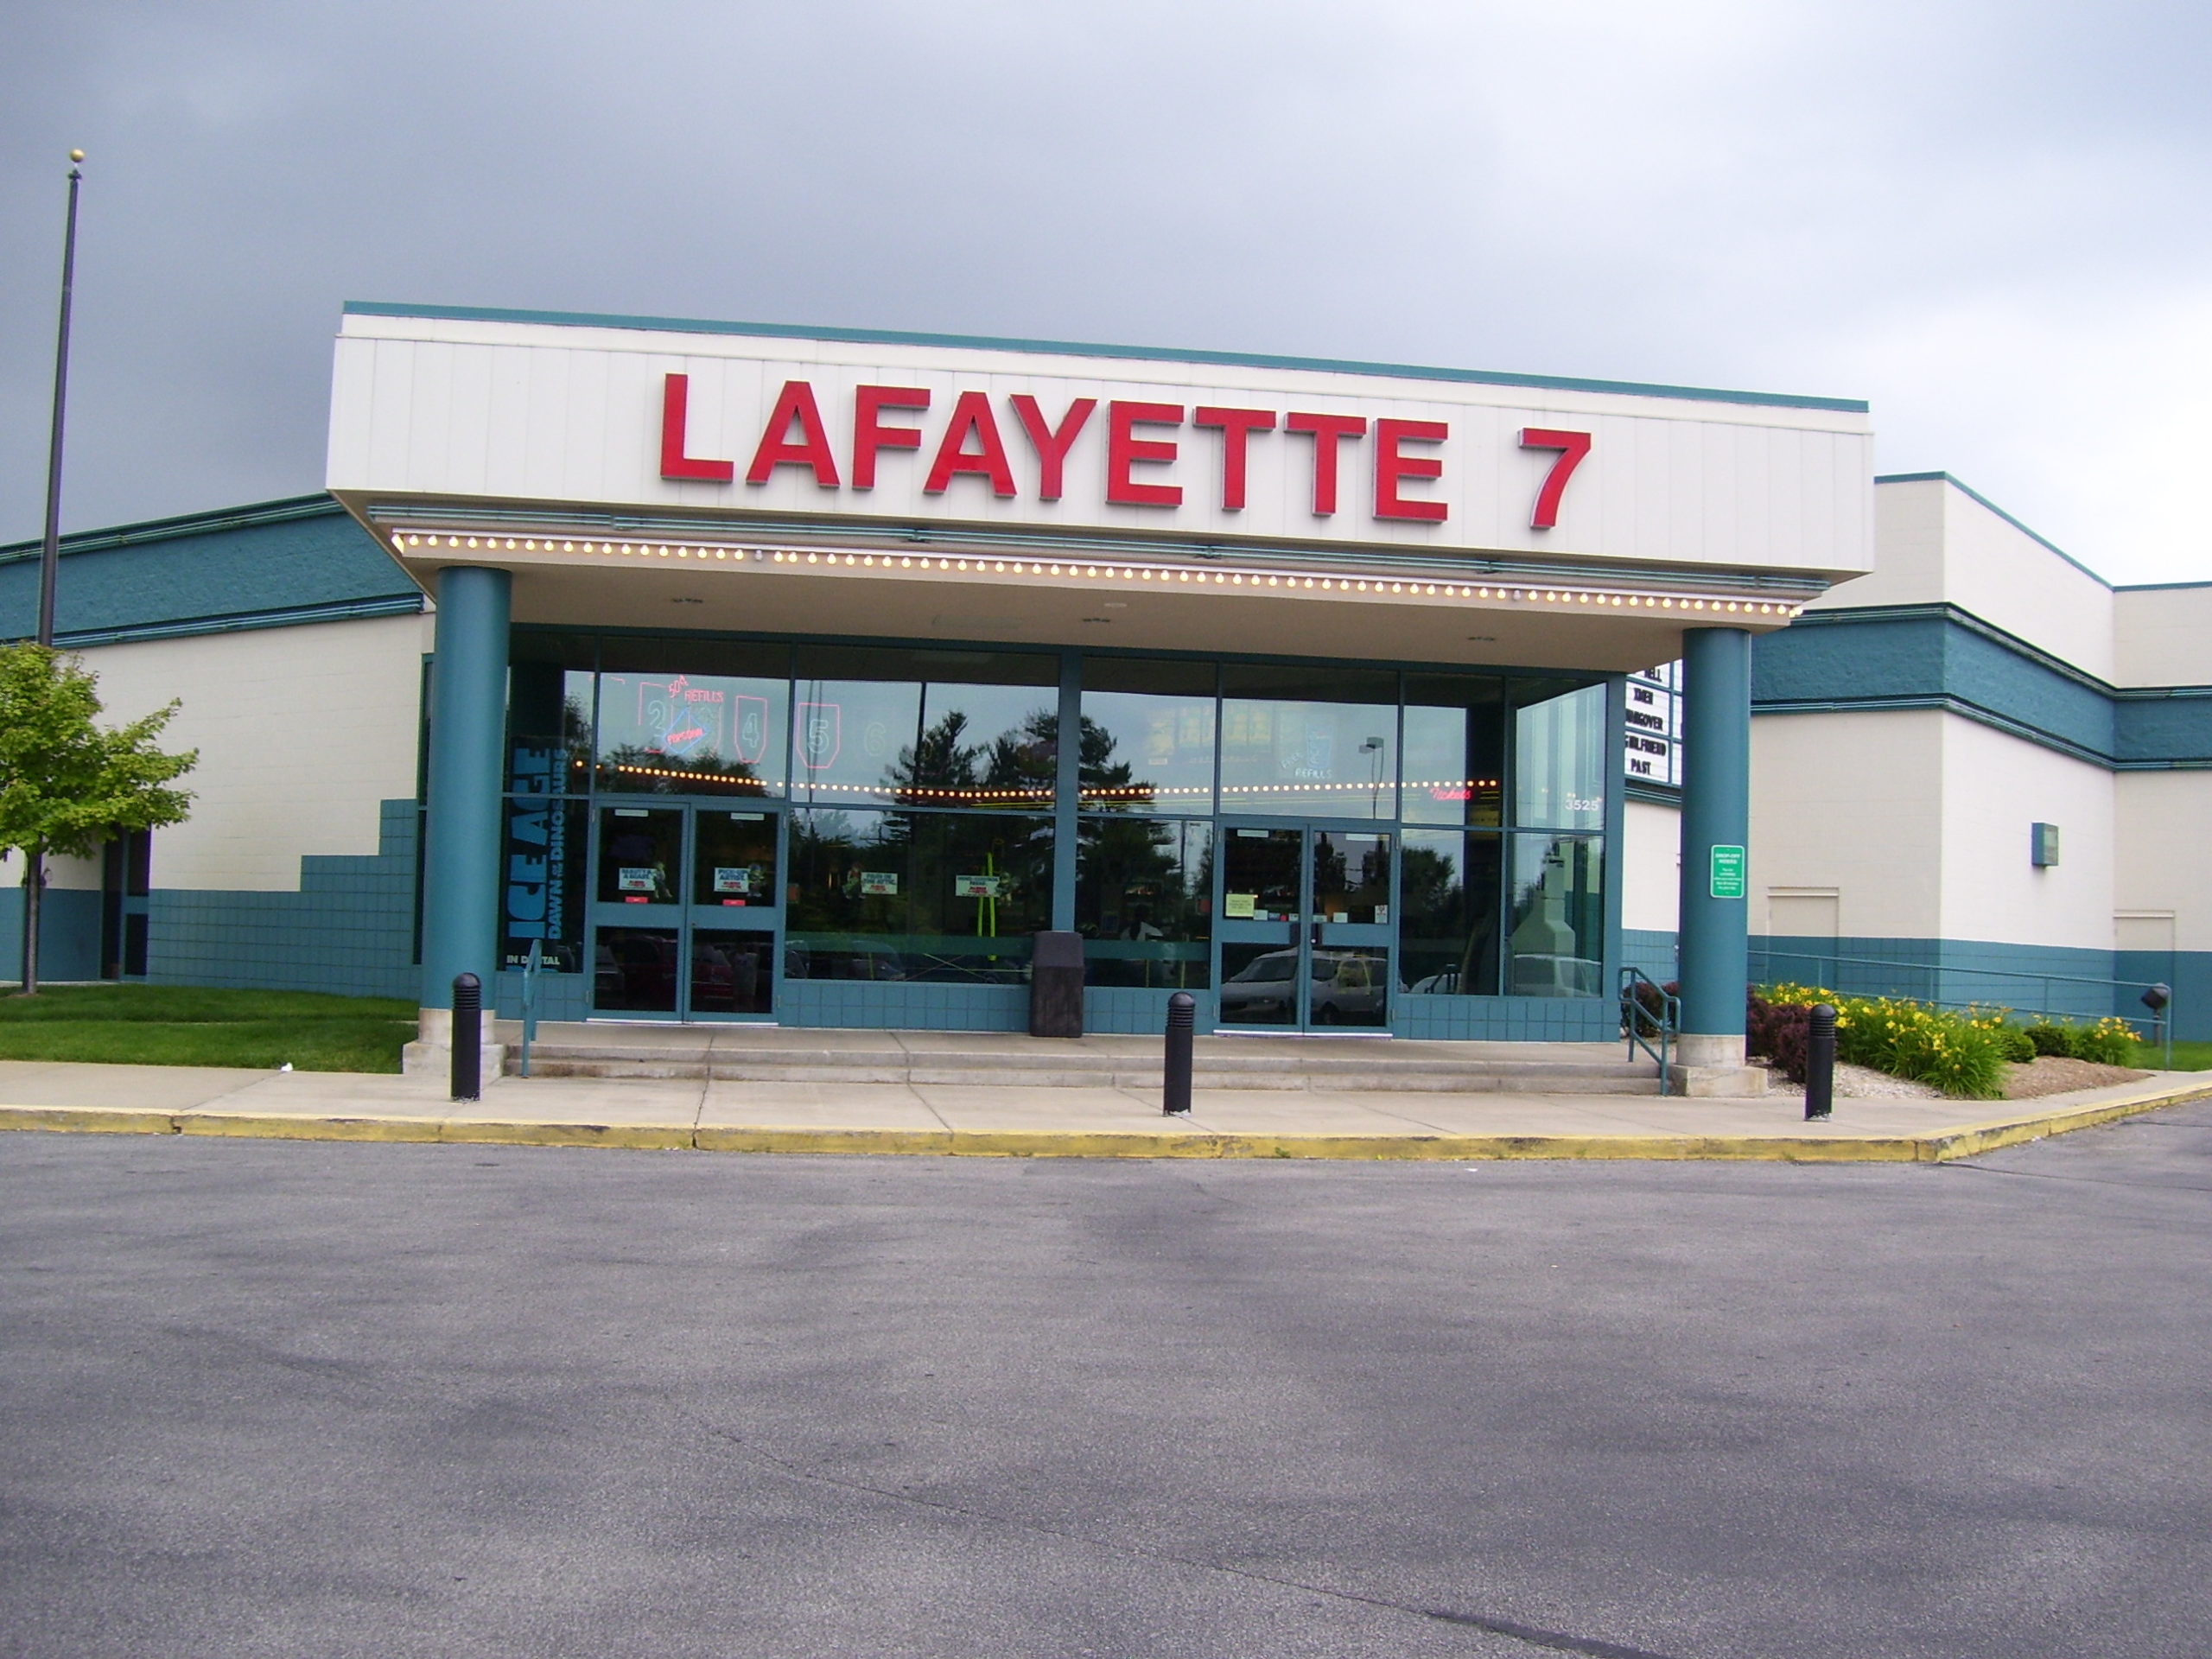 Commerical Business Lafayette IN Paint Job